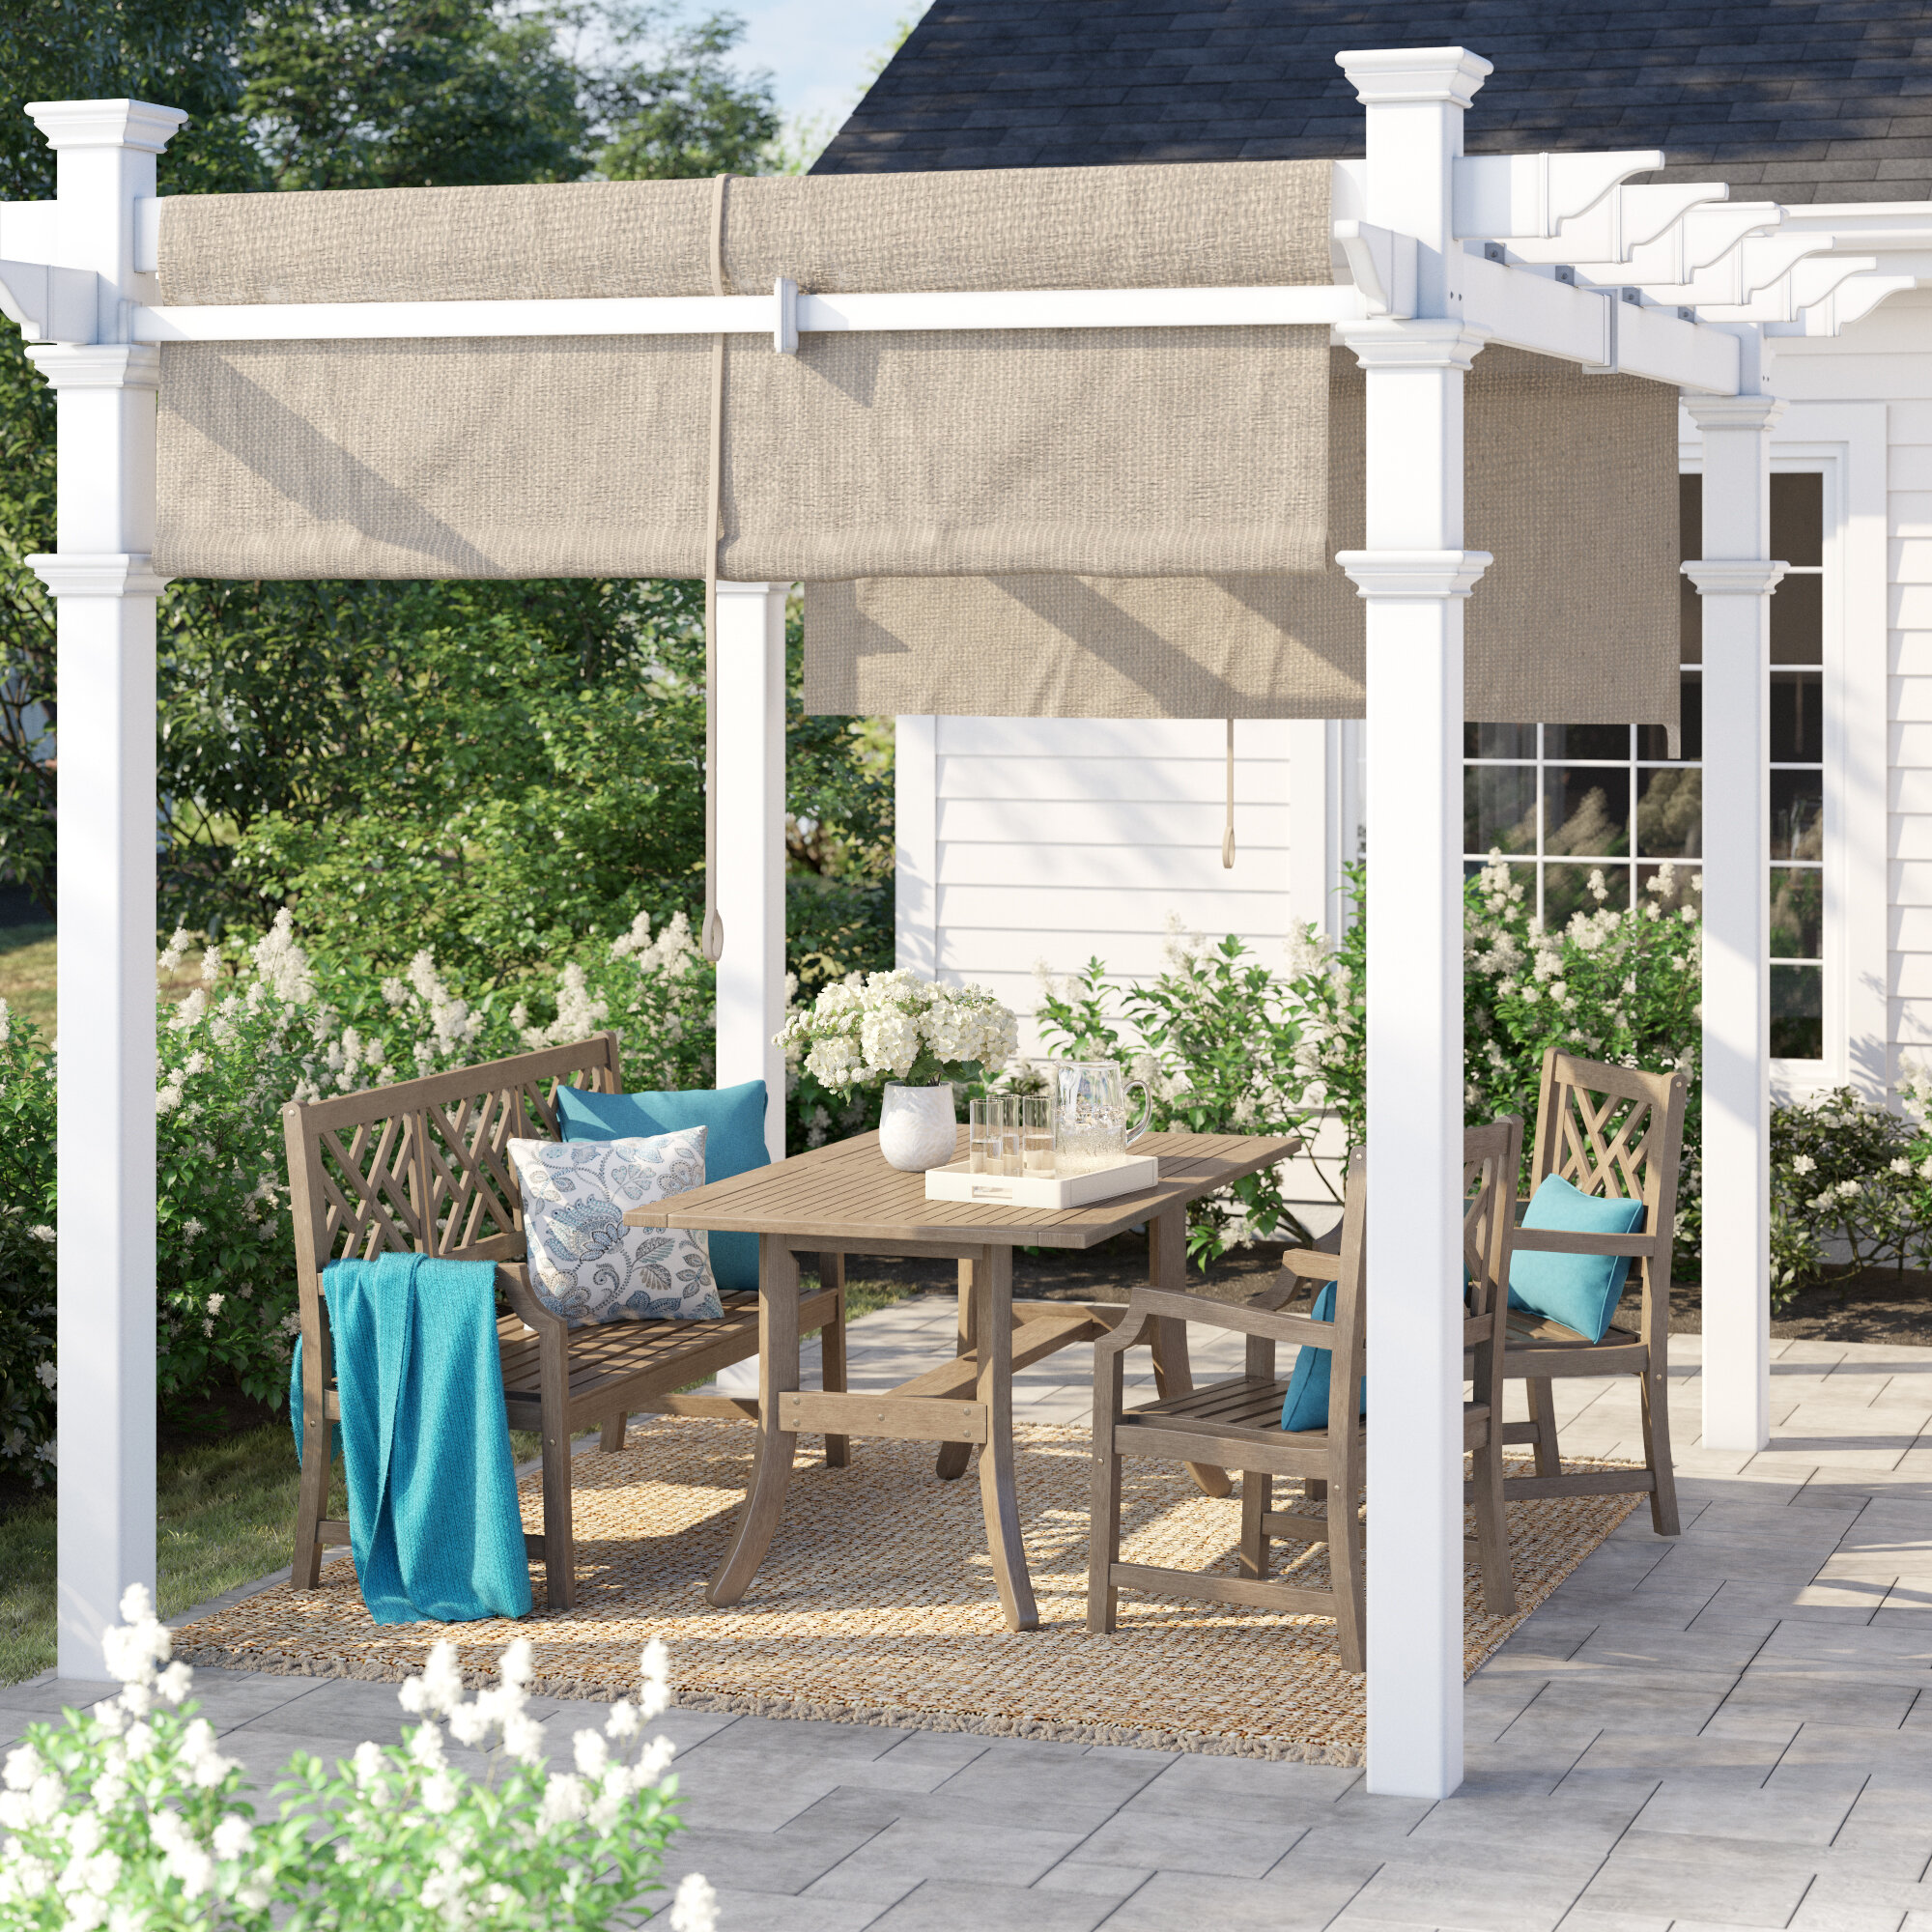 Sol 72 Outdoor Ansonia 10 W X 10 D Vinyl Pergola With Canopy Reviews Wayfair,How To Cut A Dragon Fruit Video